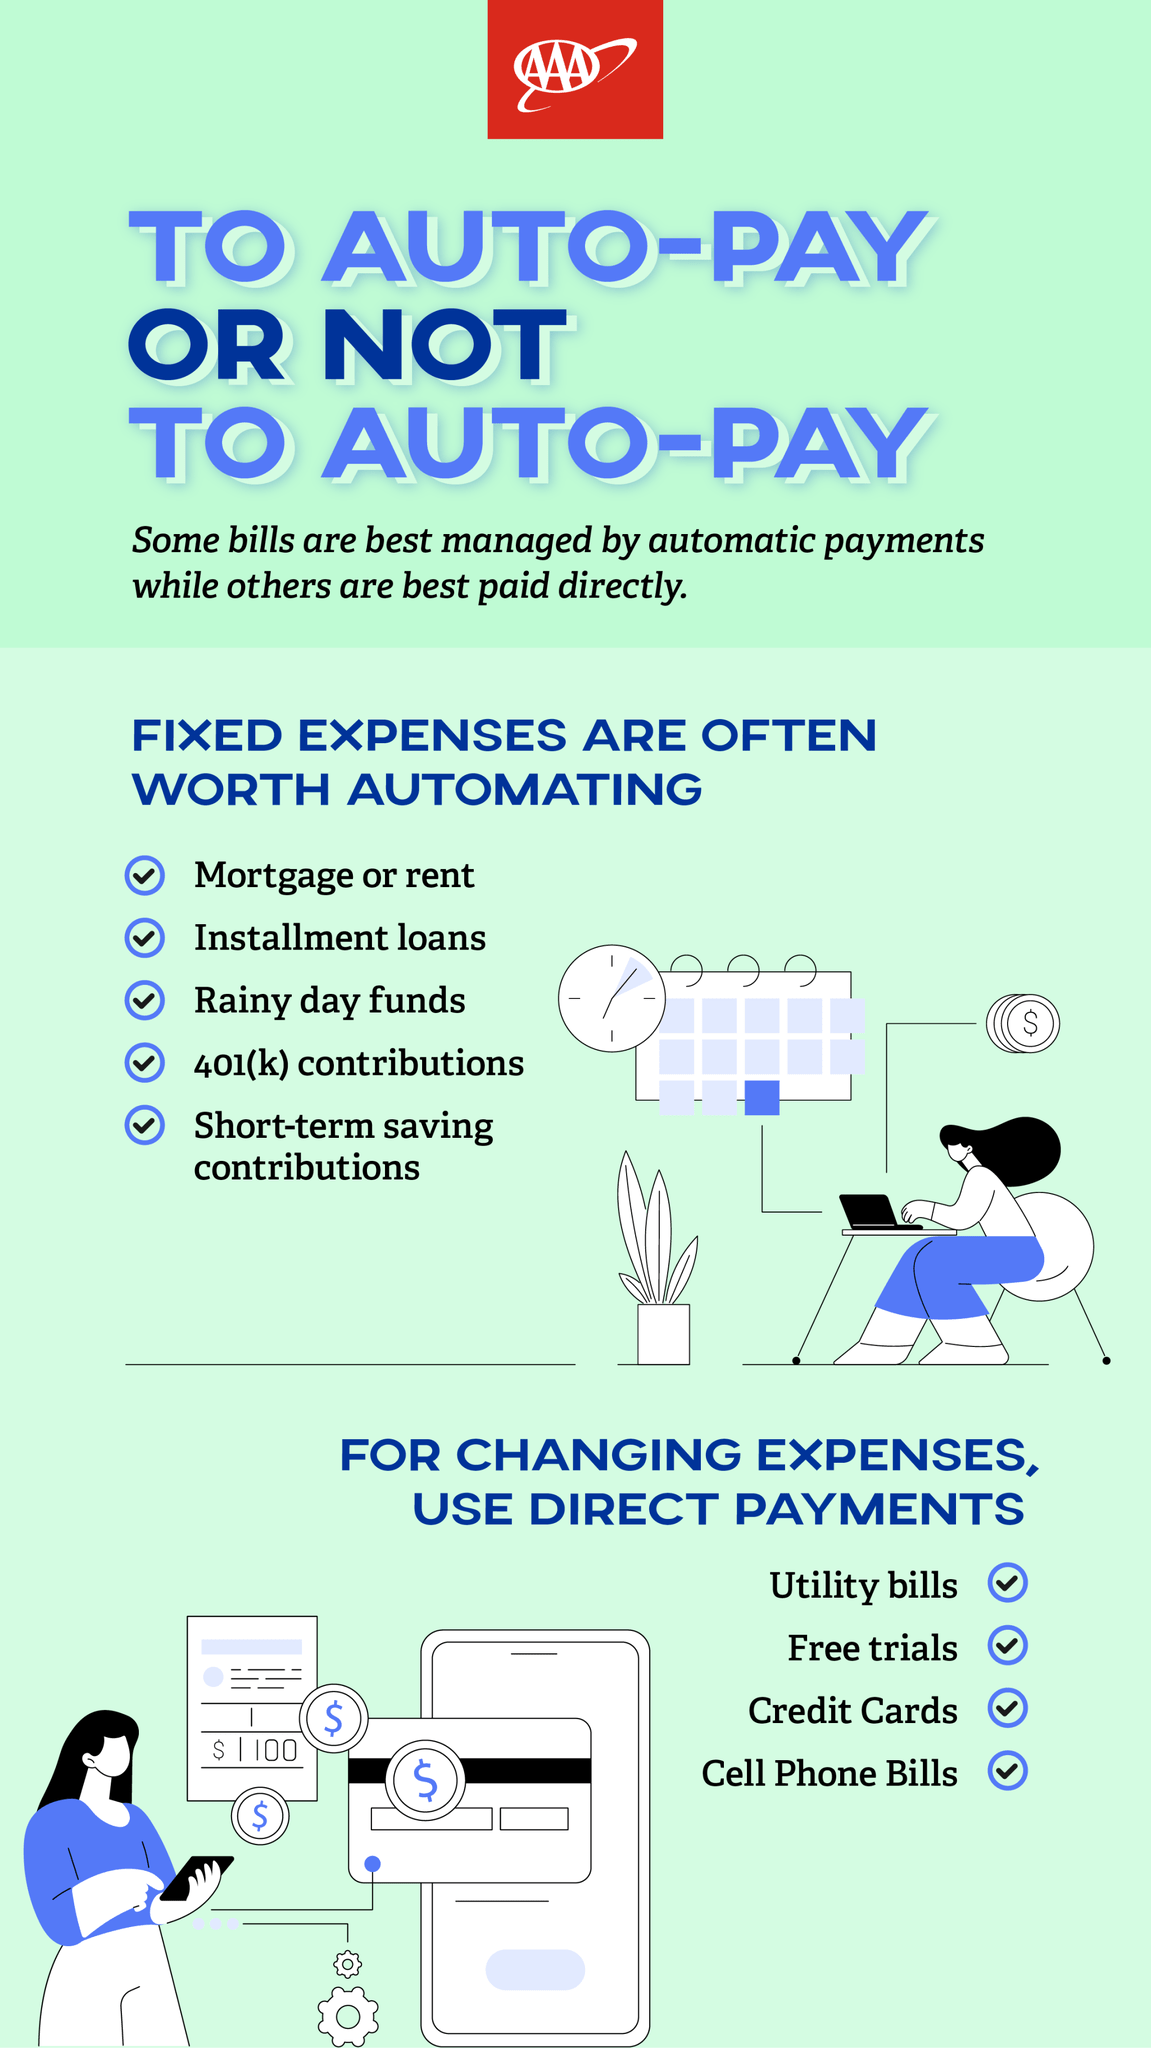 AAA autopay infographic